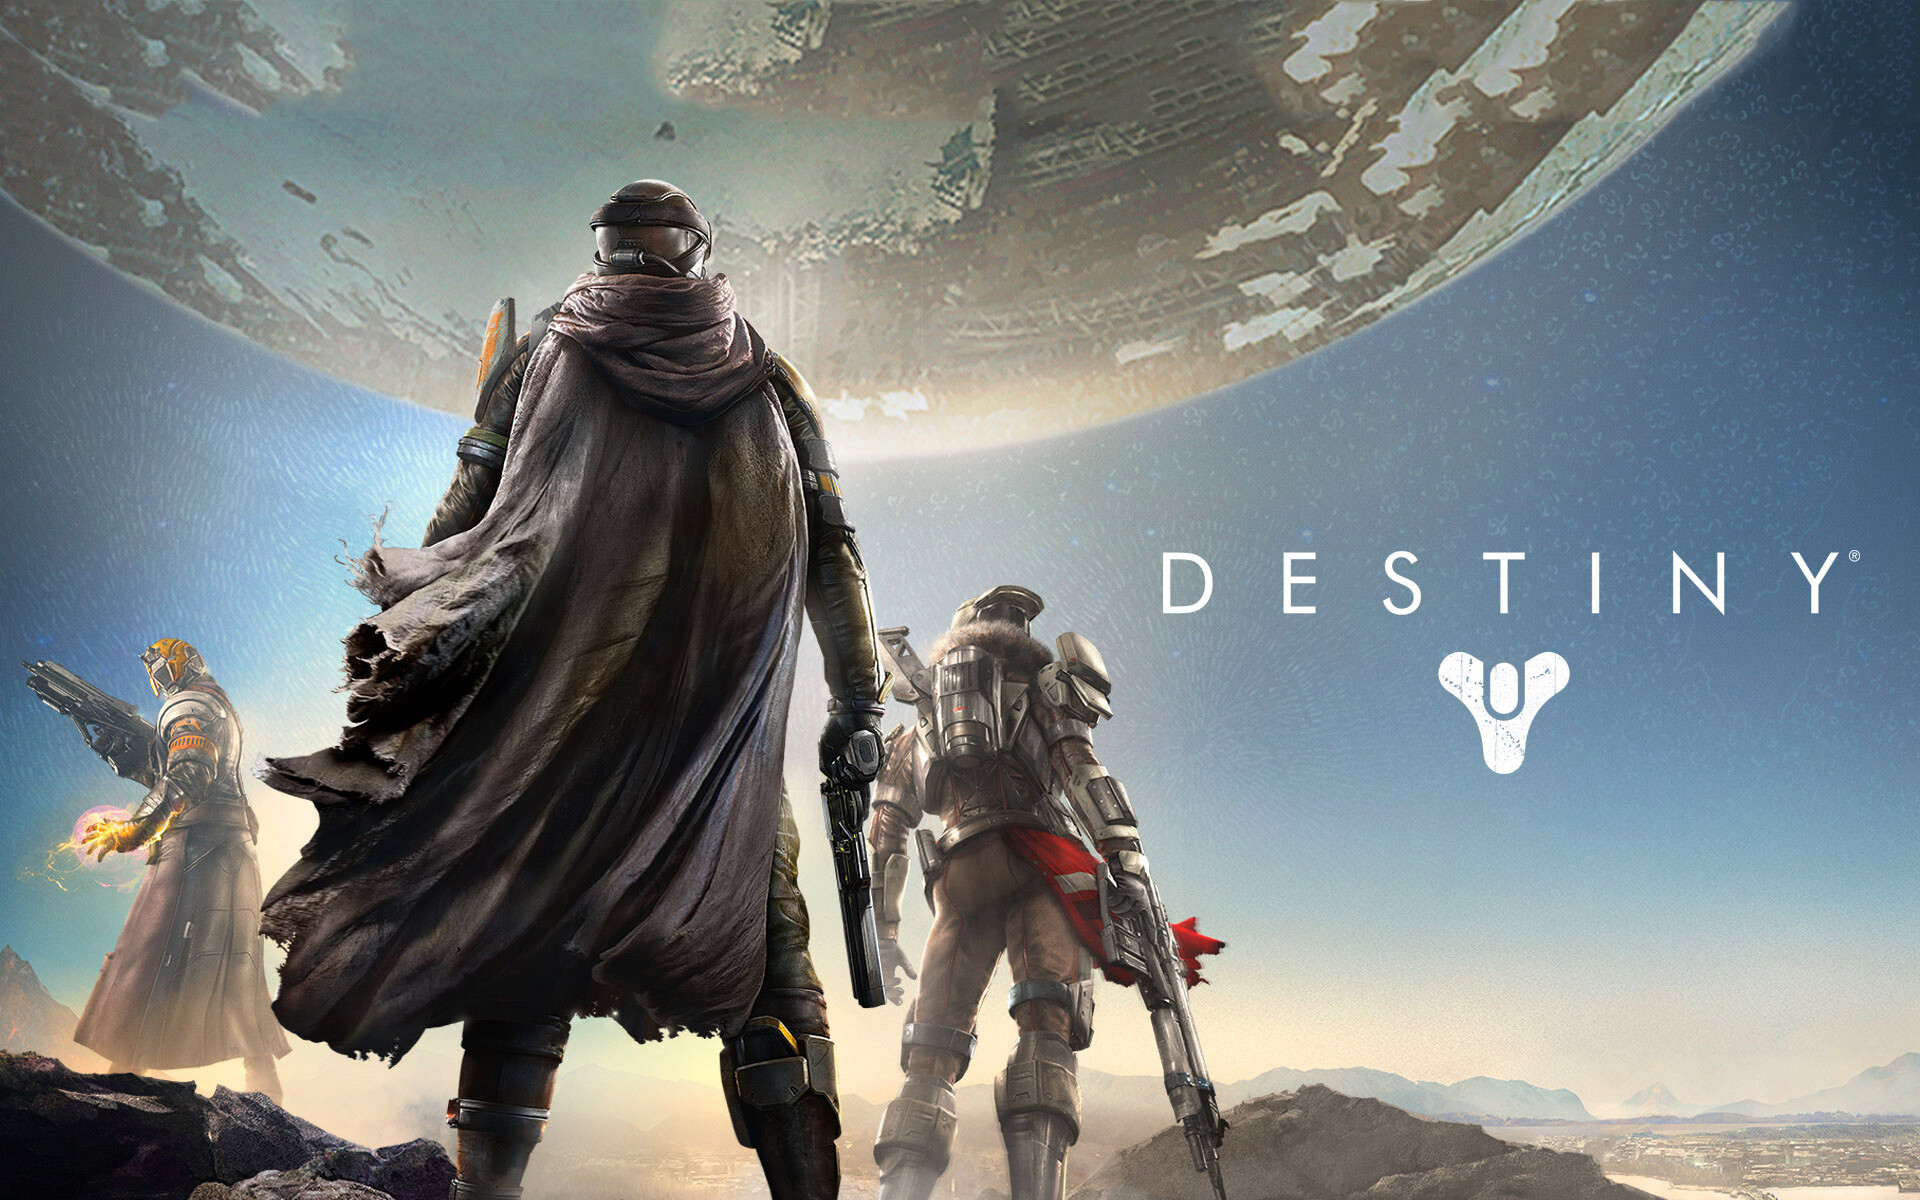 Destiny, HD wallpapers, Gaming experience, Action-filled gameplay, 1920x1200 HD Desktop